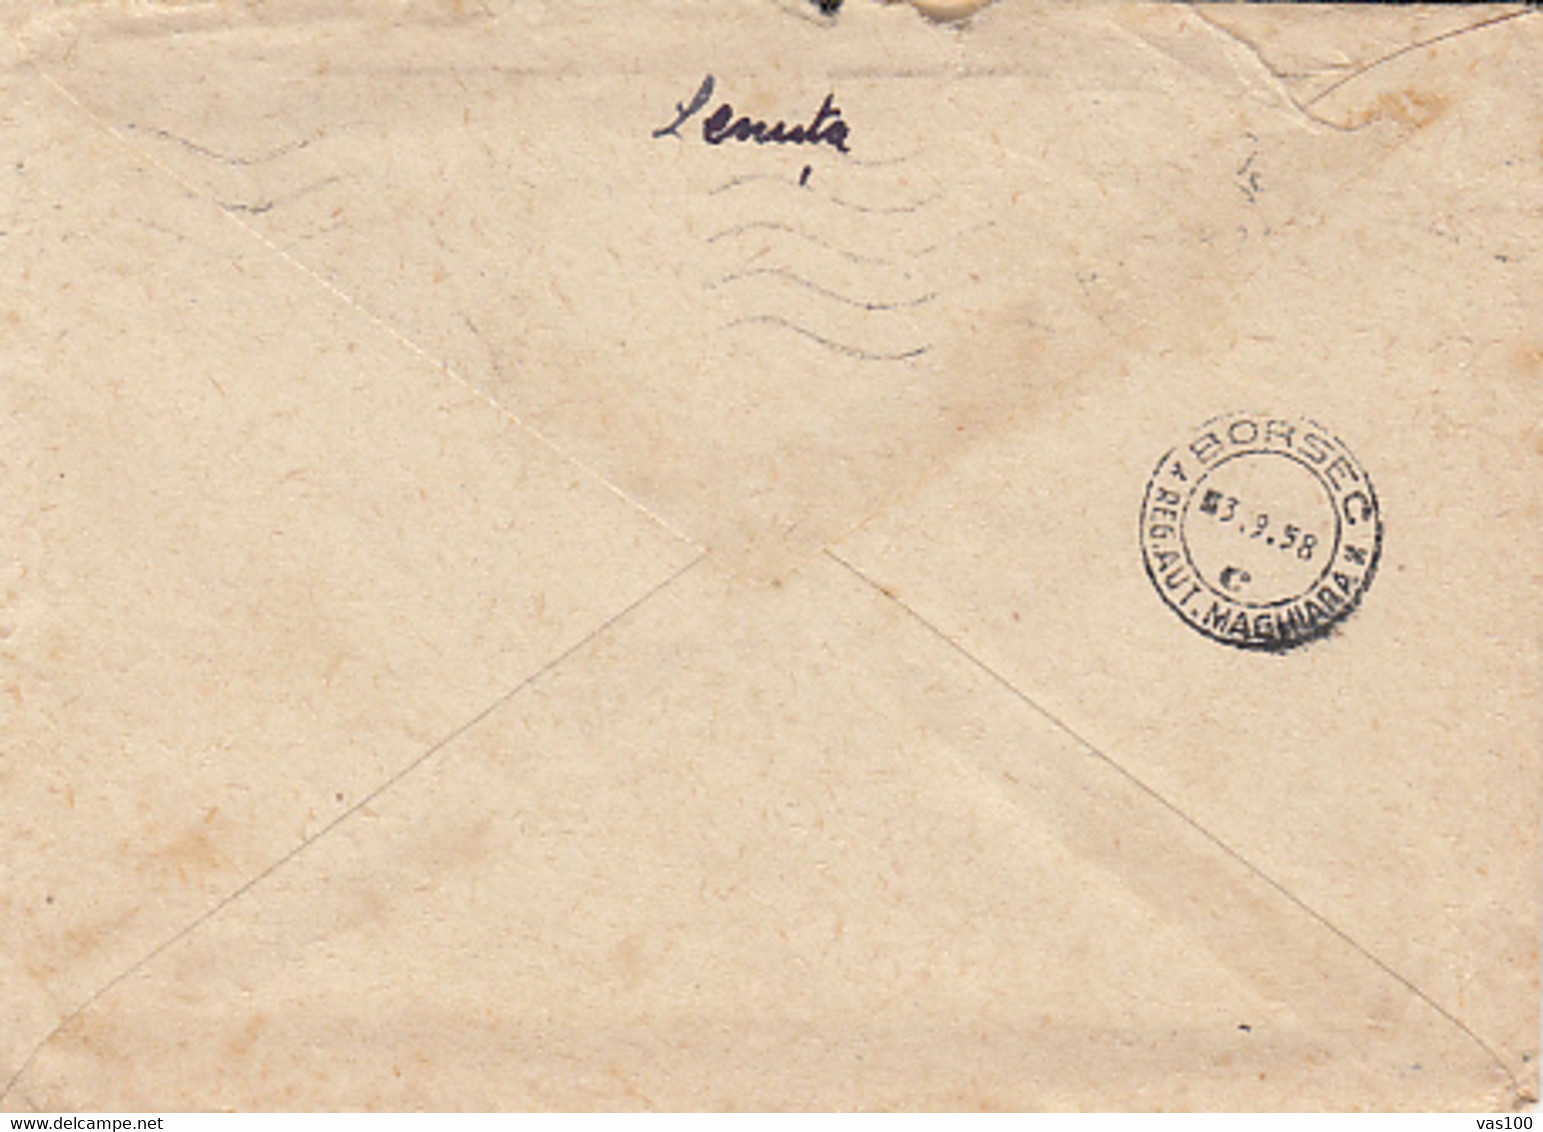 CONSTRUCTIONS WORKER STAMP, WAVY LINES CANCELLATIONS ON COVER, 1958, ROMANIA - Covers & Documents